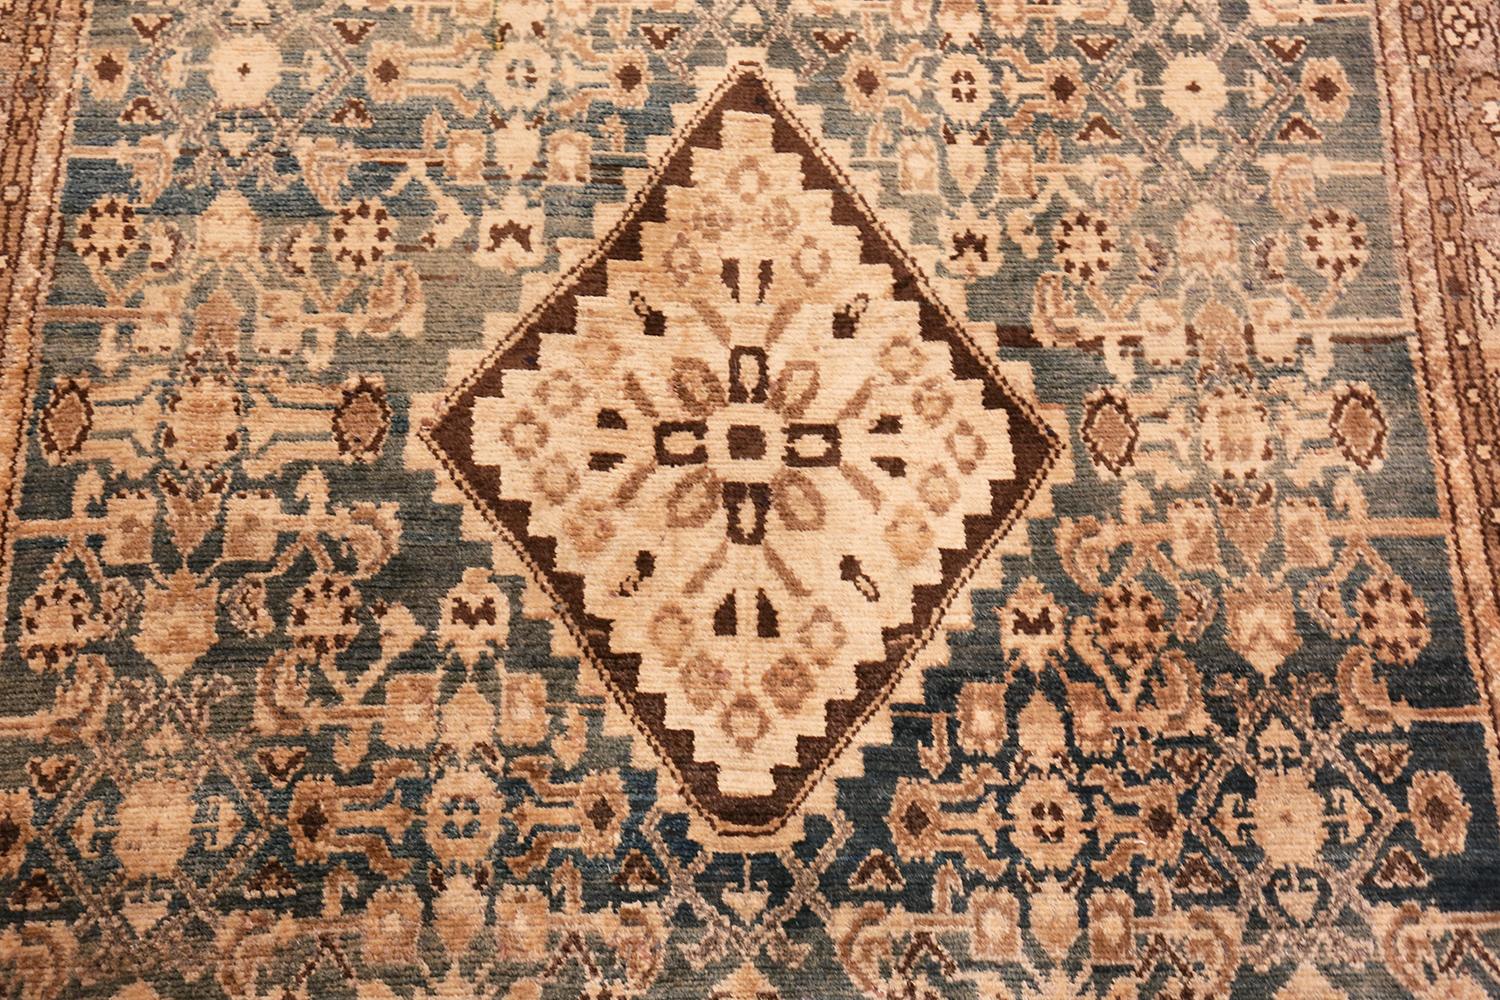 20th Century Small Size Antique Persian Malayer Rug. Size: 4 ft x 6 ft 3 in